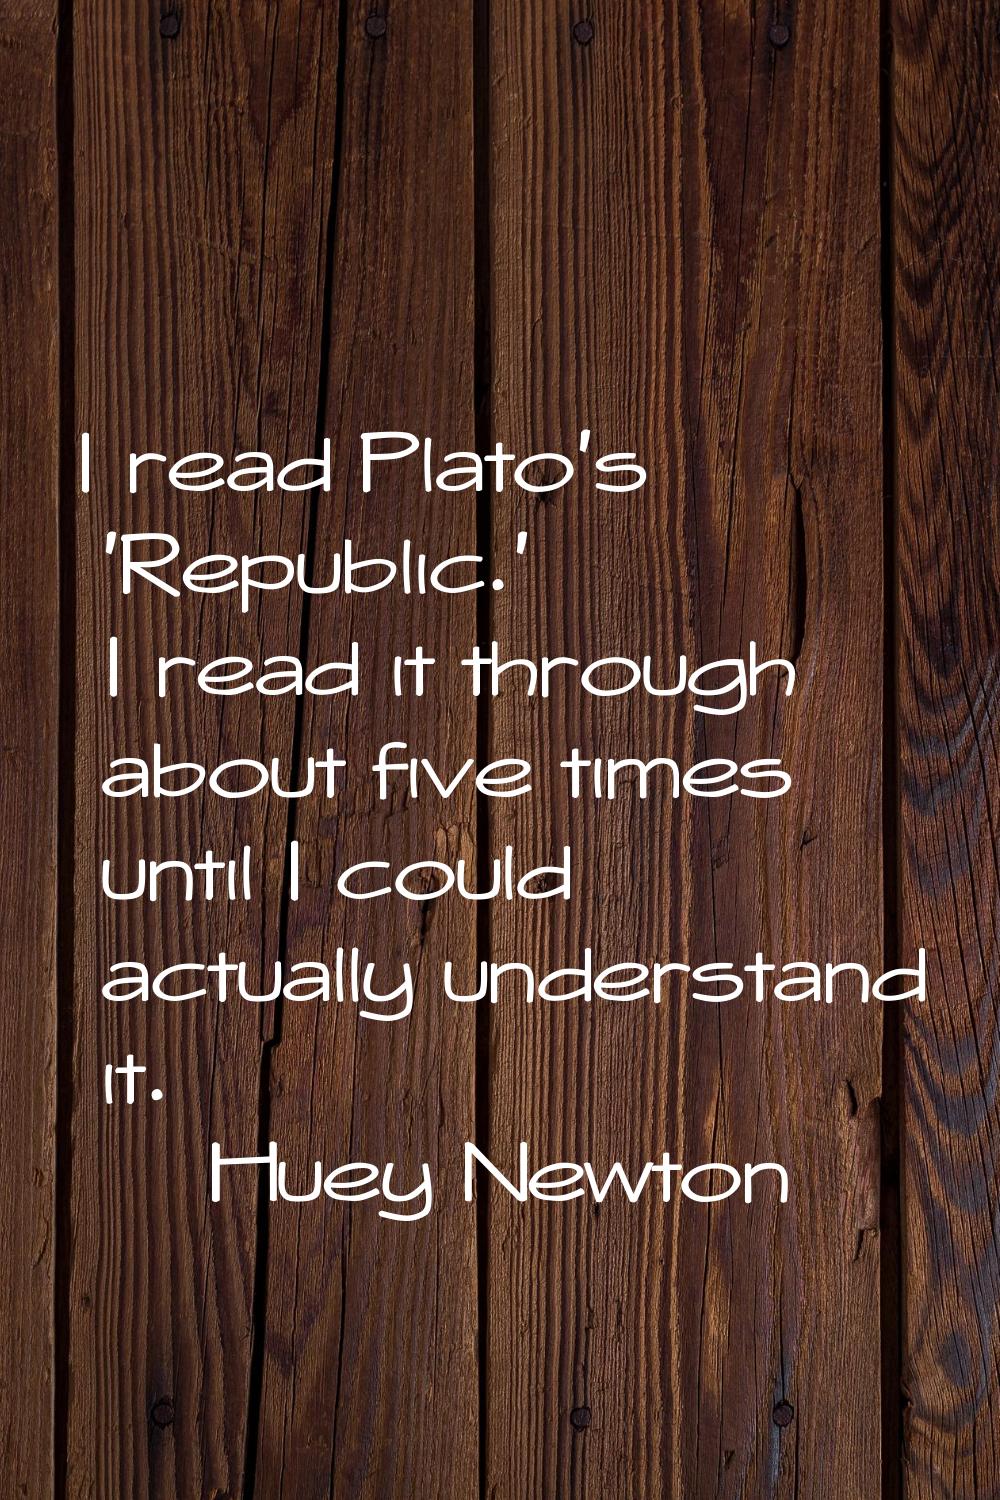 I read Plato's 'Republic.' I read it through about five times until I could actually understand it.